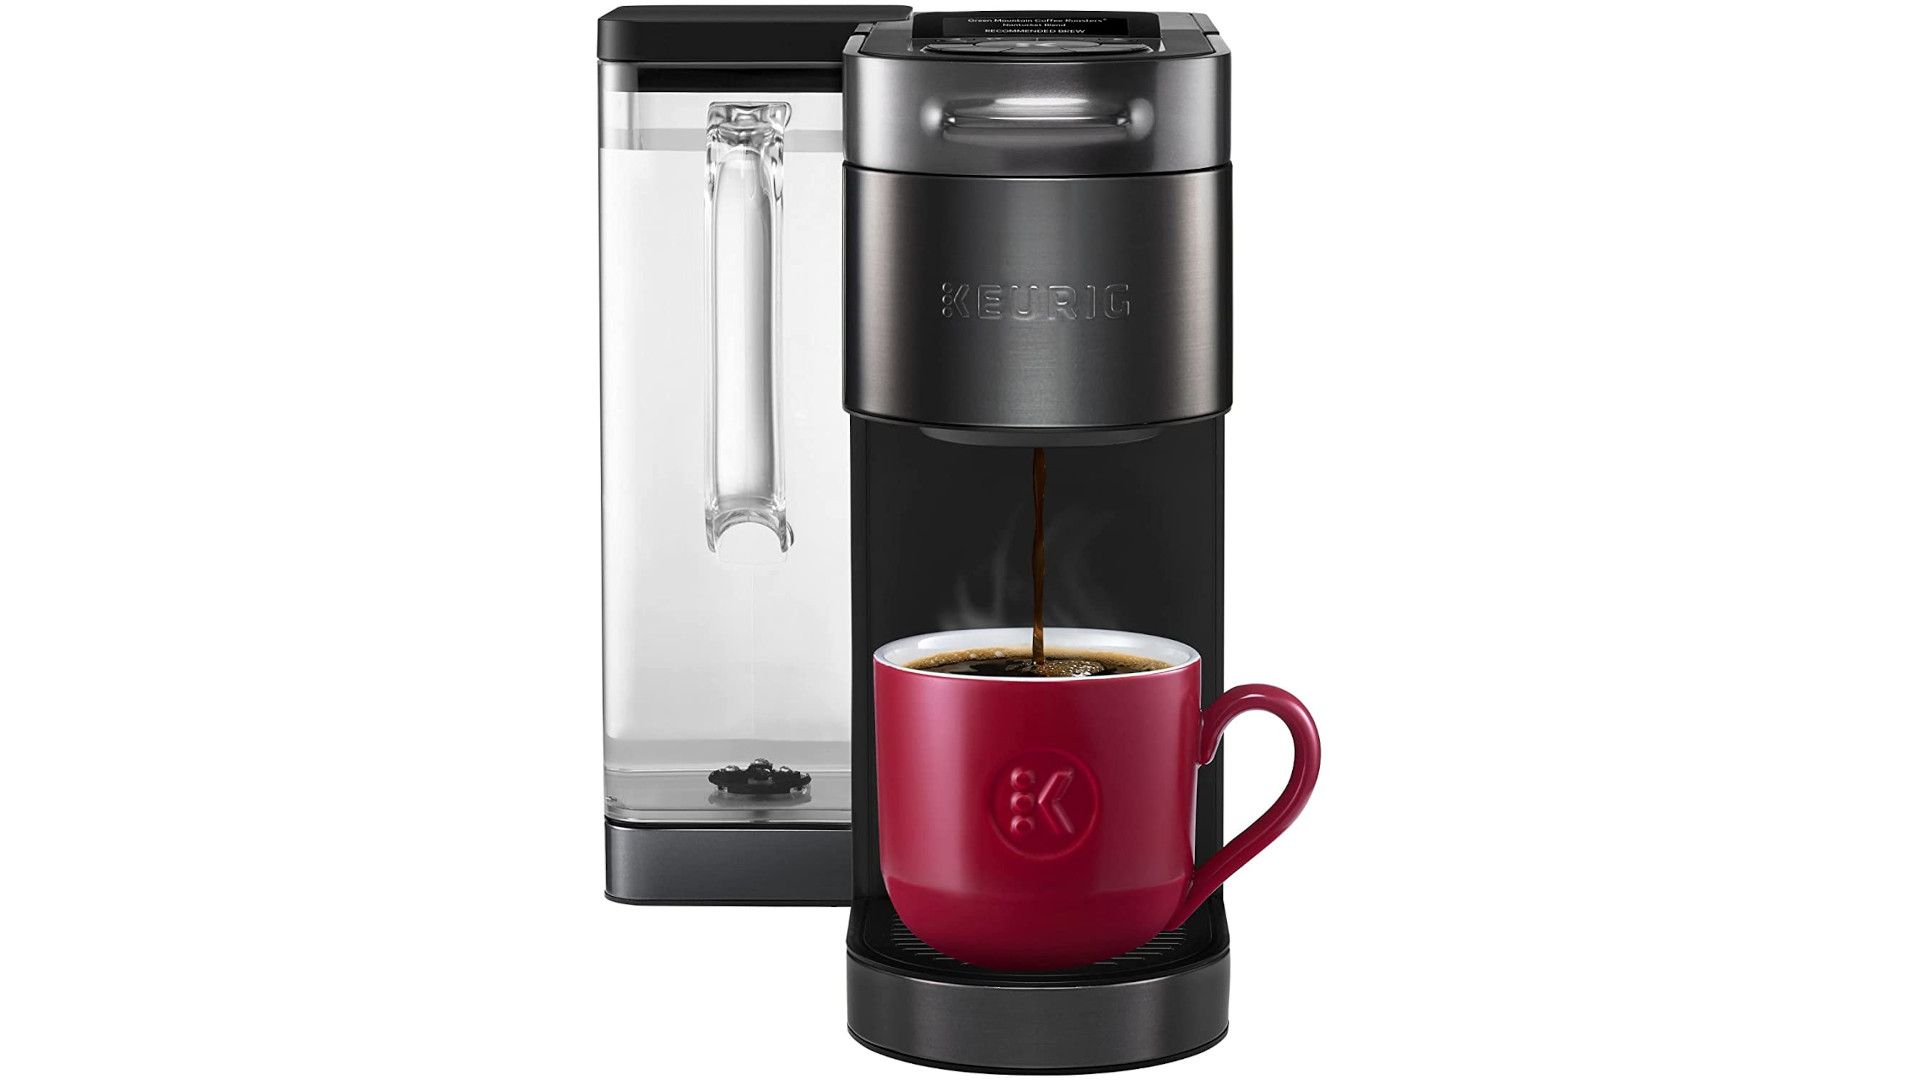 A smart coffee maker is shown on a white background.